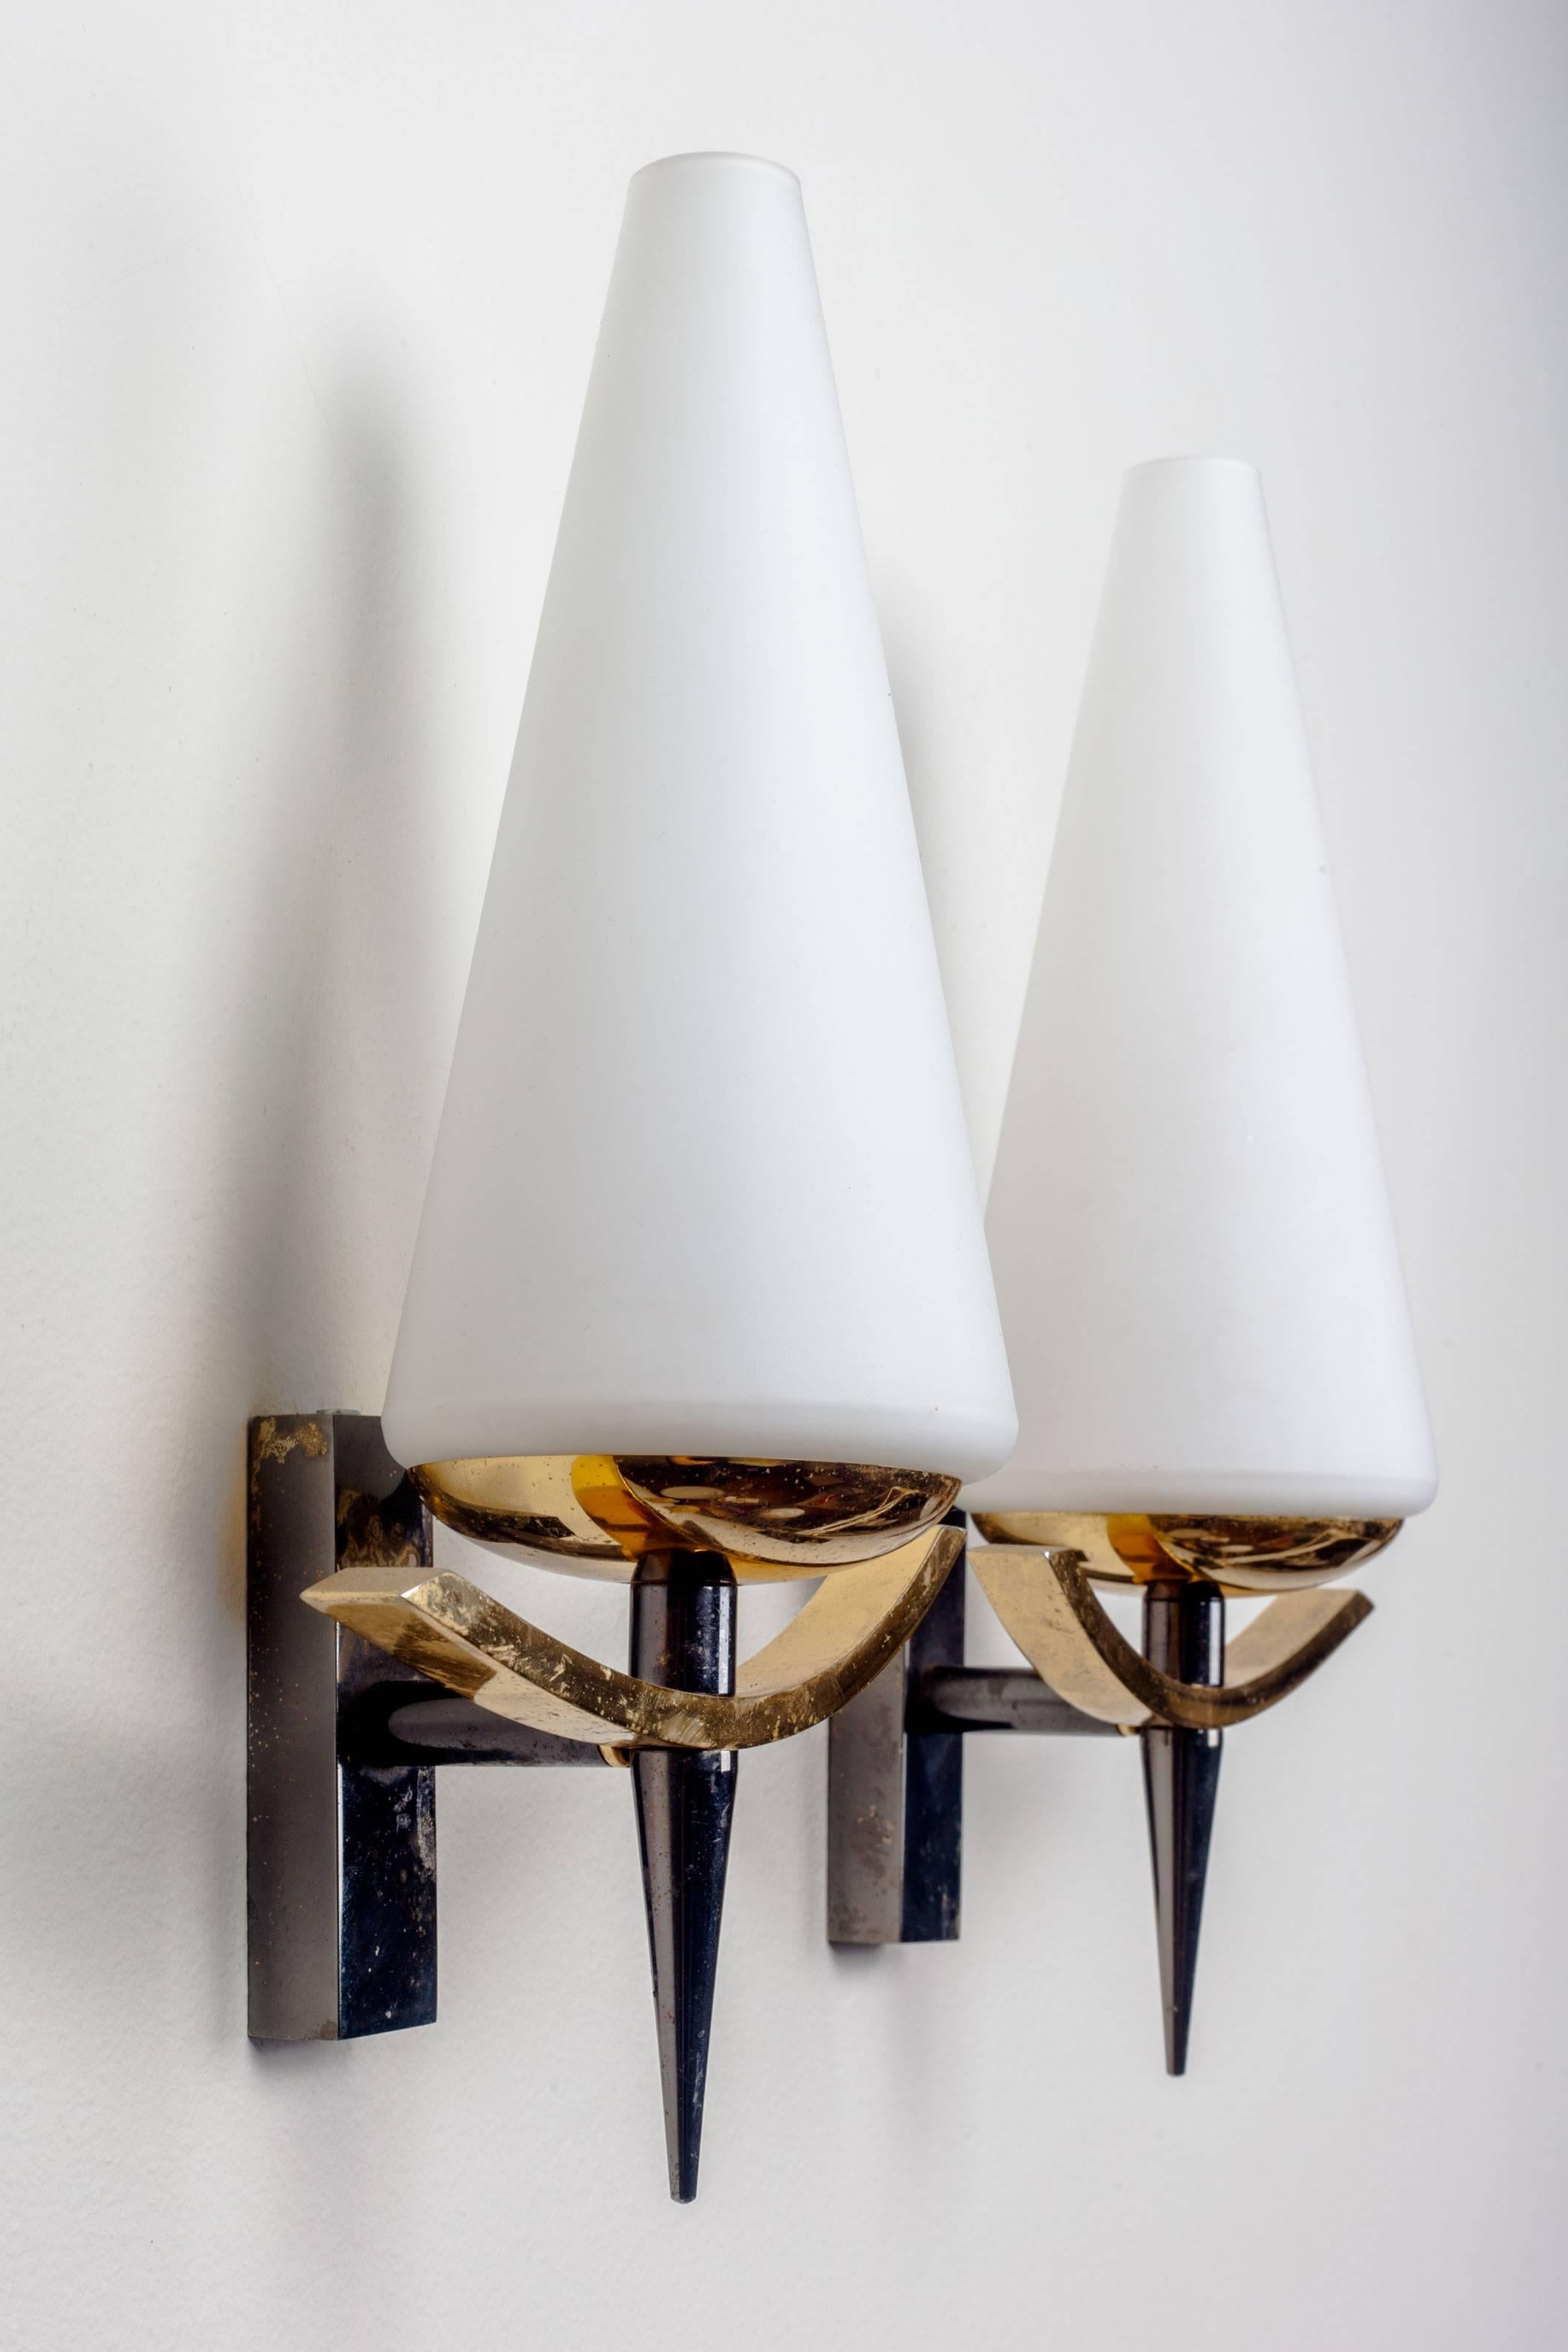 Metal Vintage French Sconces by Arlus with Conic White Glass Shades and Brass, 1950s